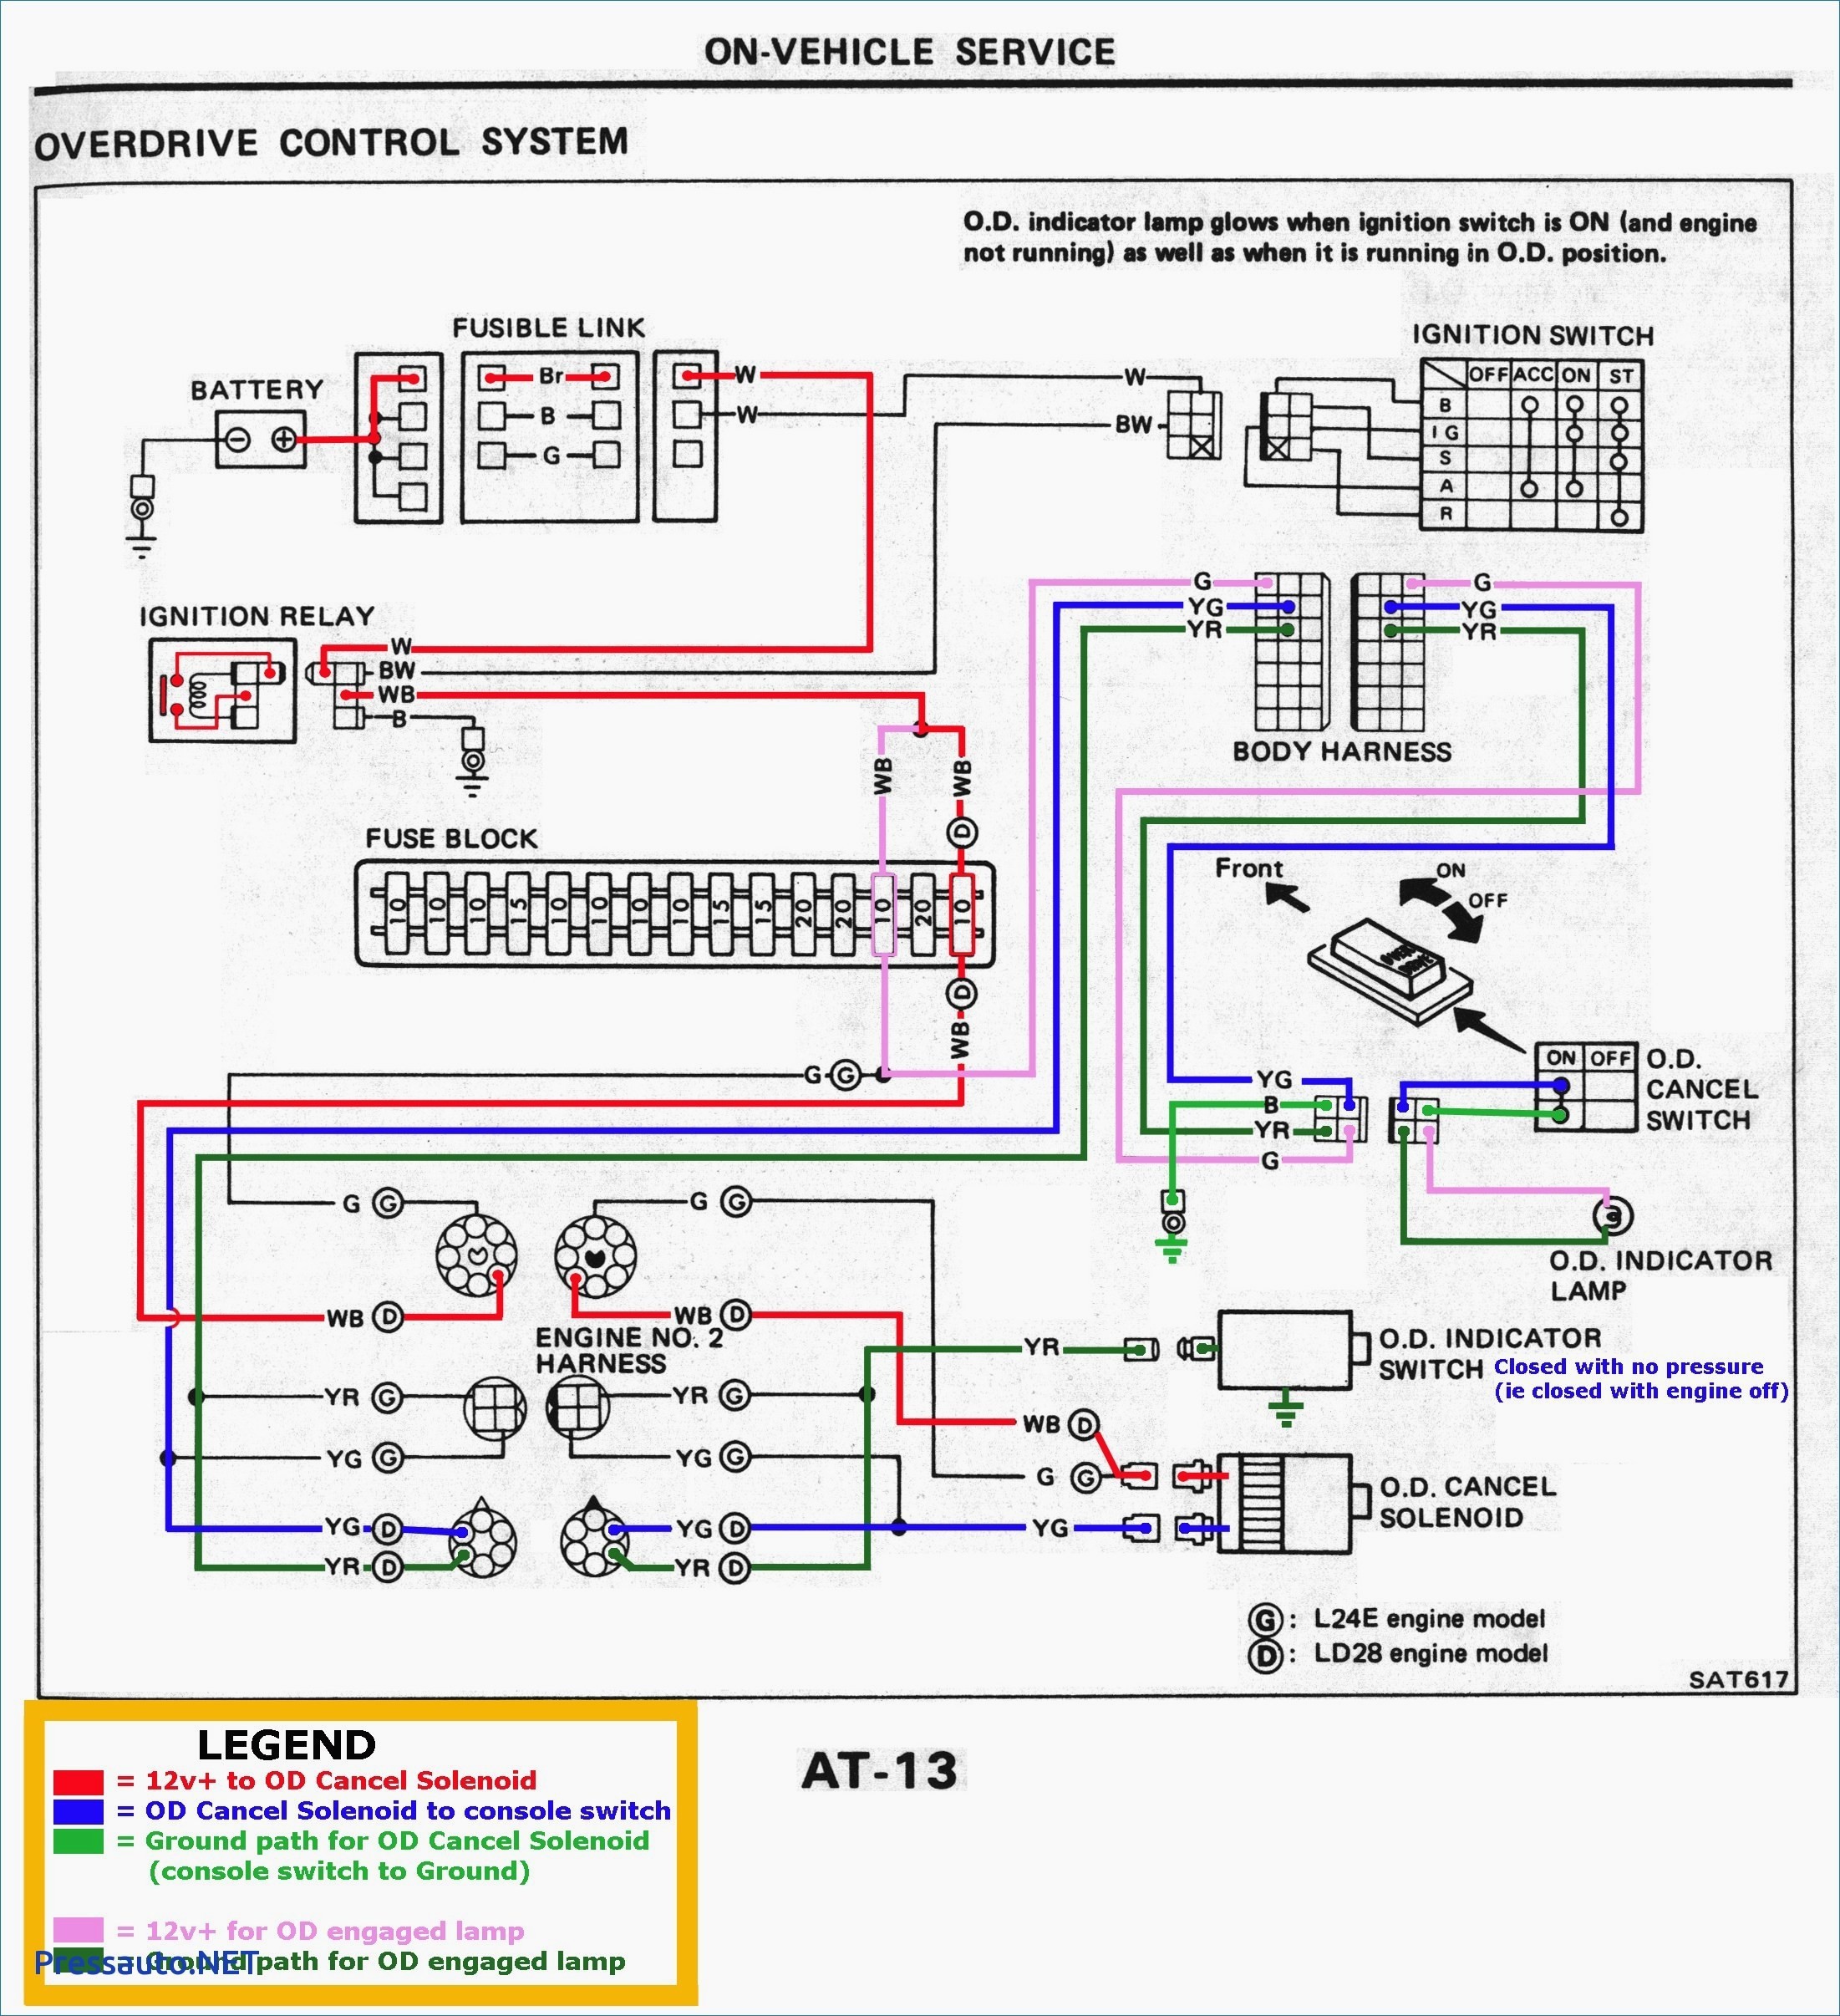 Gfci Outlet Wiring Diagram New Excellent Nissan Wiring Diagrams Contemporary Electrical and